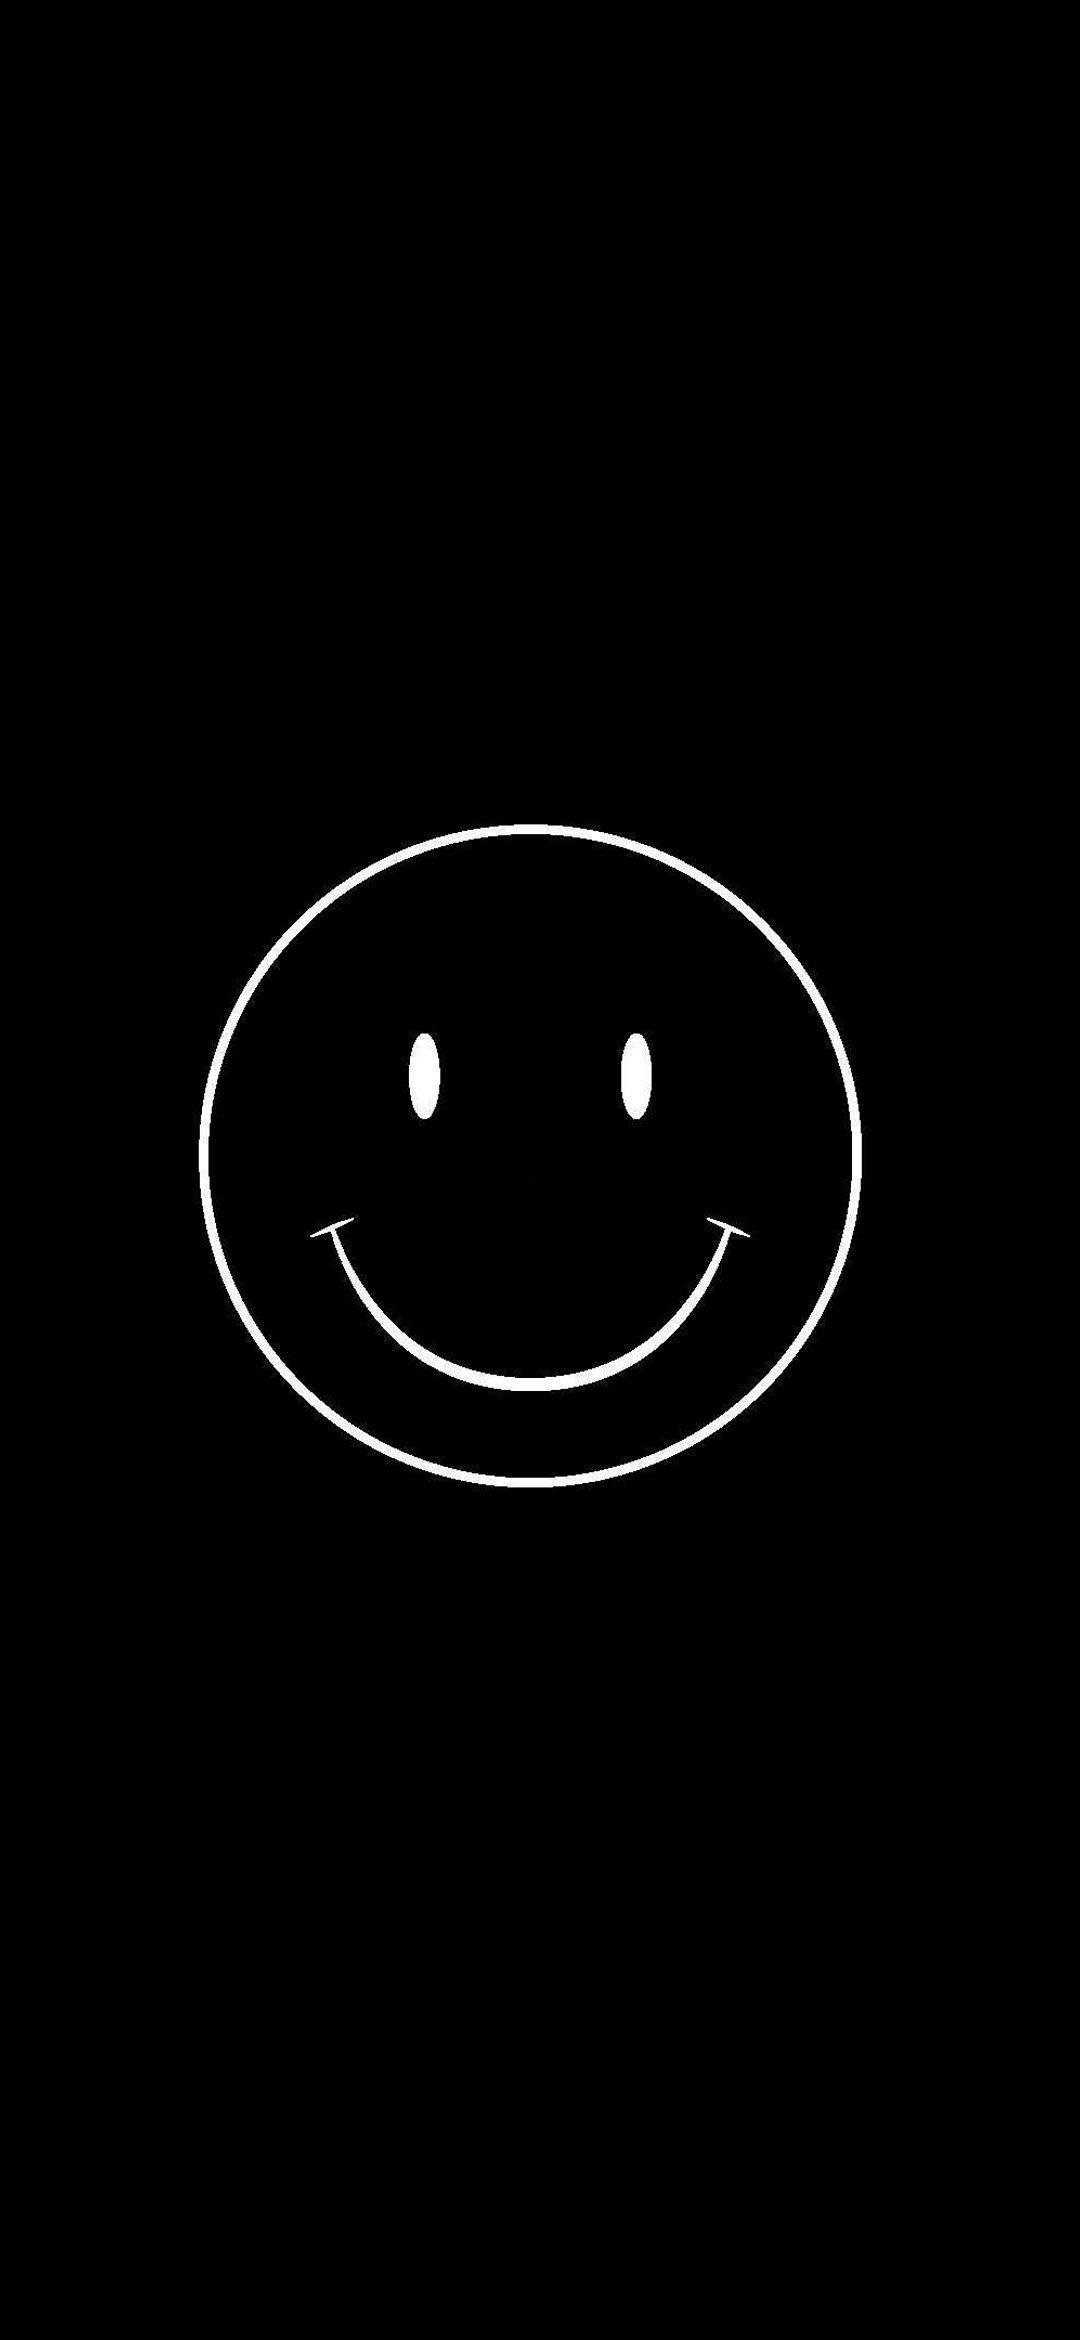 Smiley Wallpapers - Smiley Face Backgrounds HD